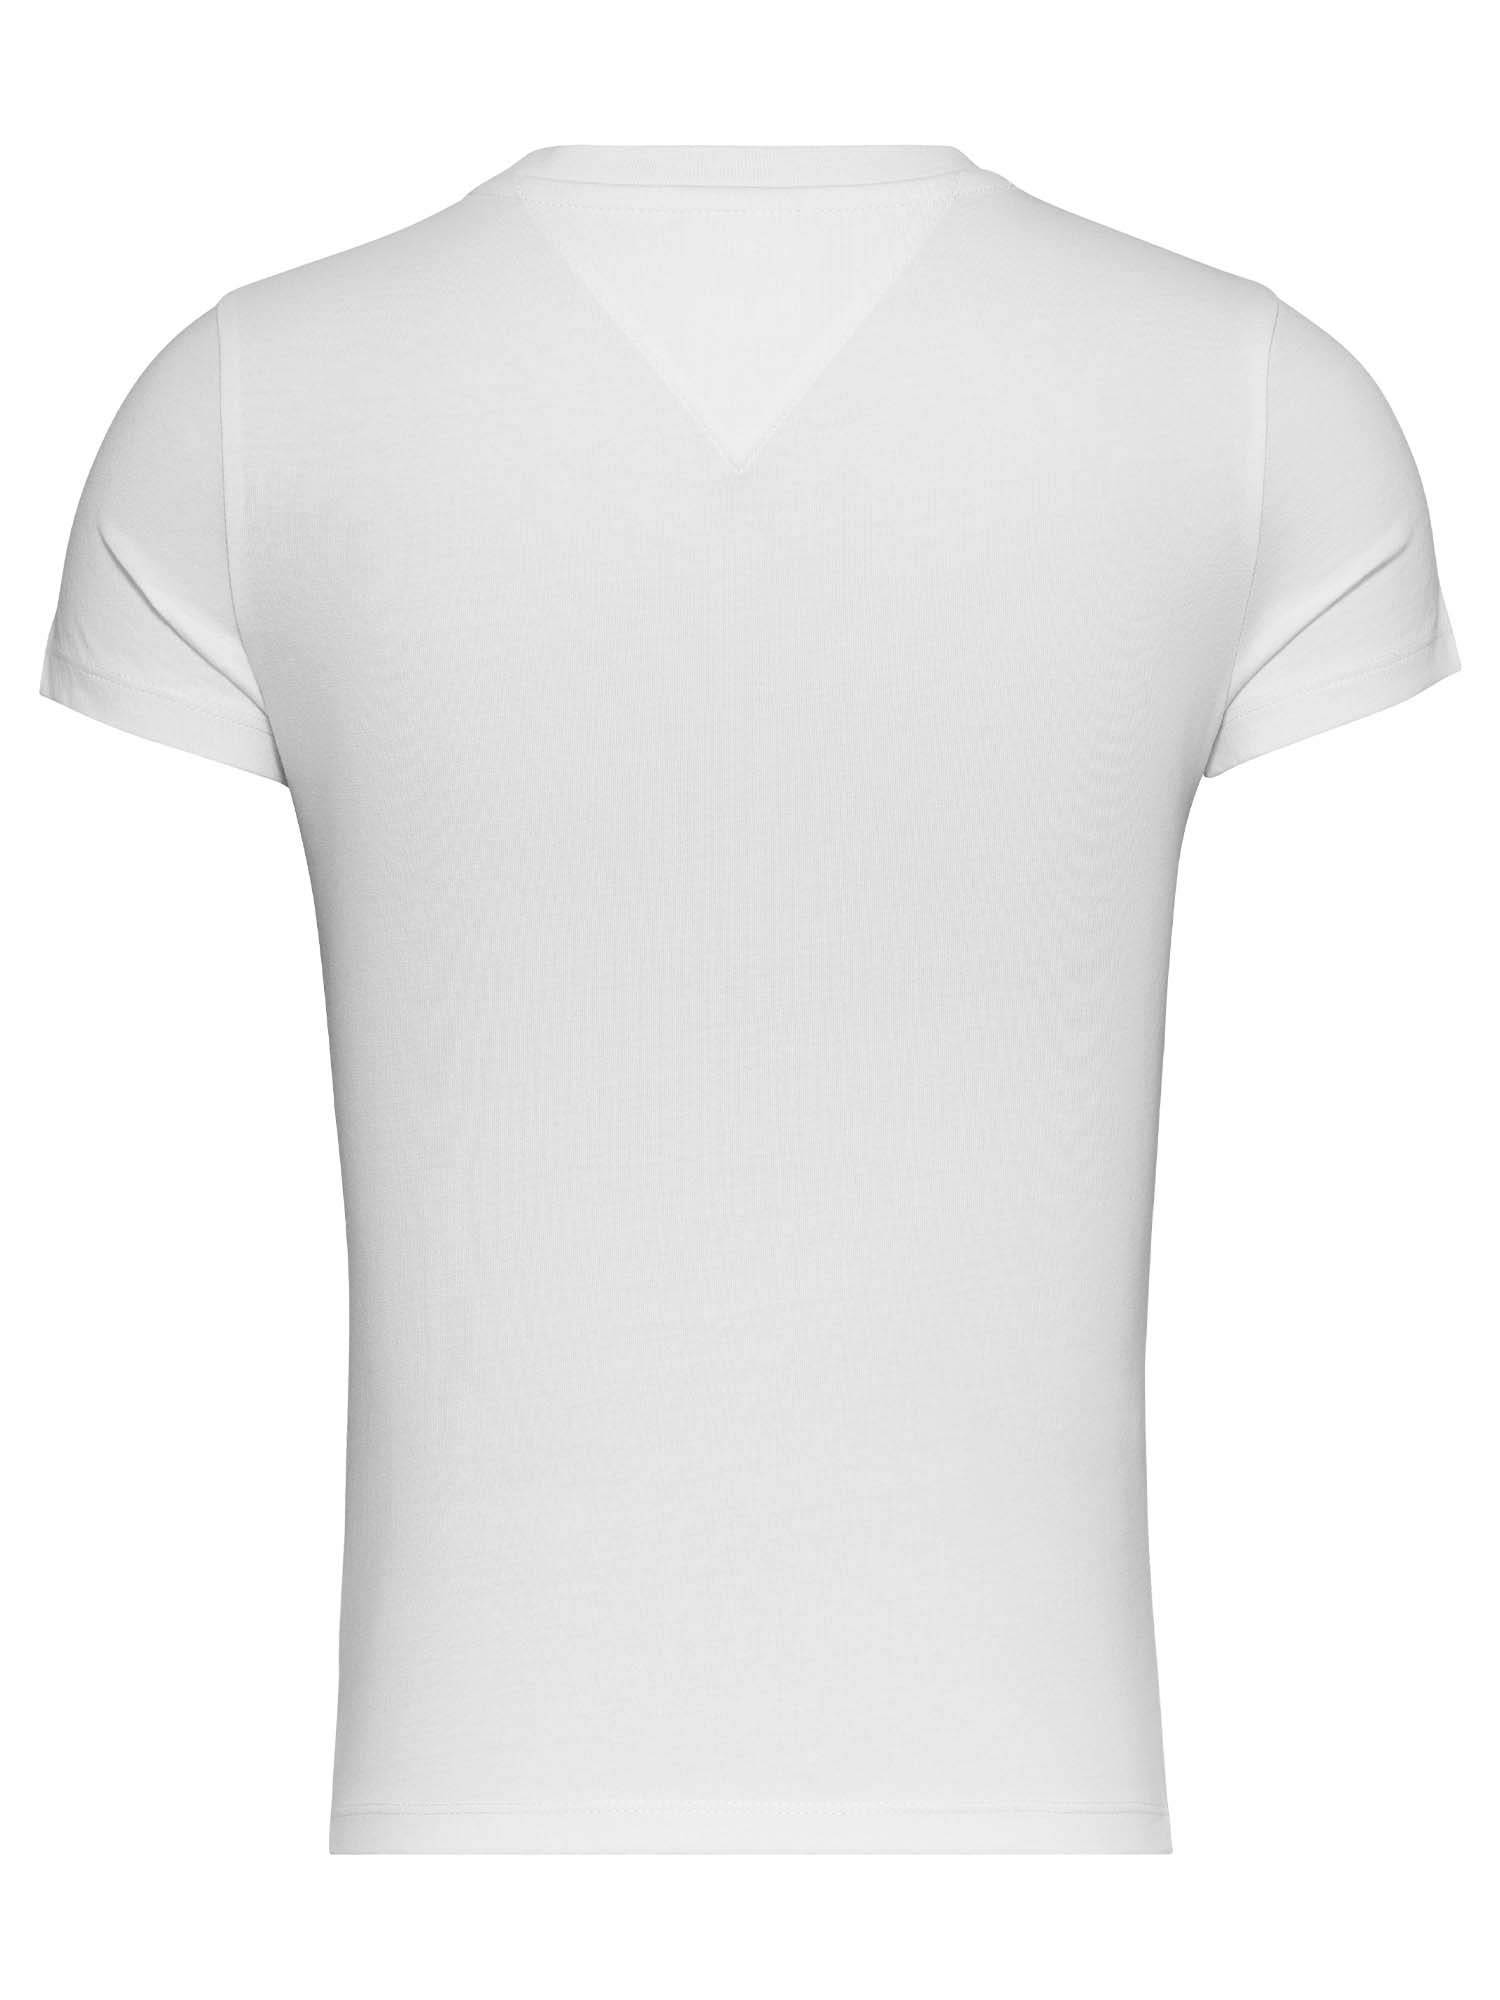 T-SHIRT DONNA SLIM LINEAR TOMMY JEANS - BIANCO